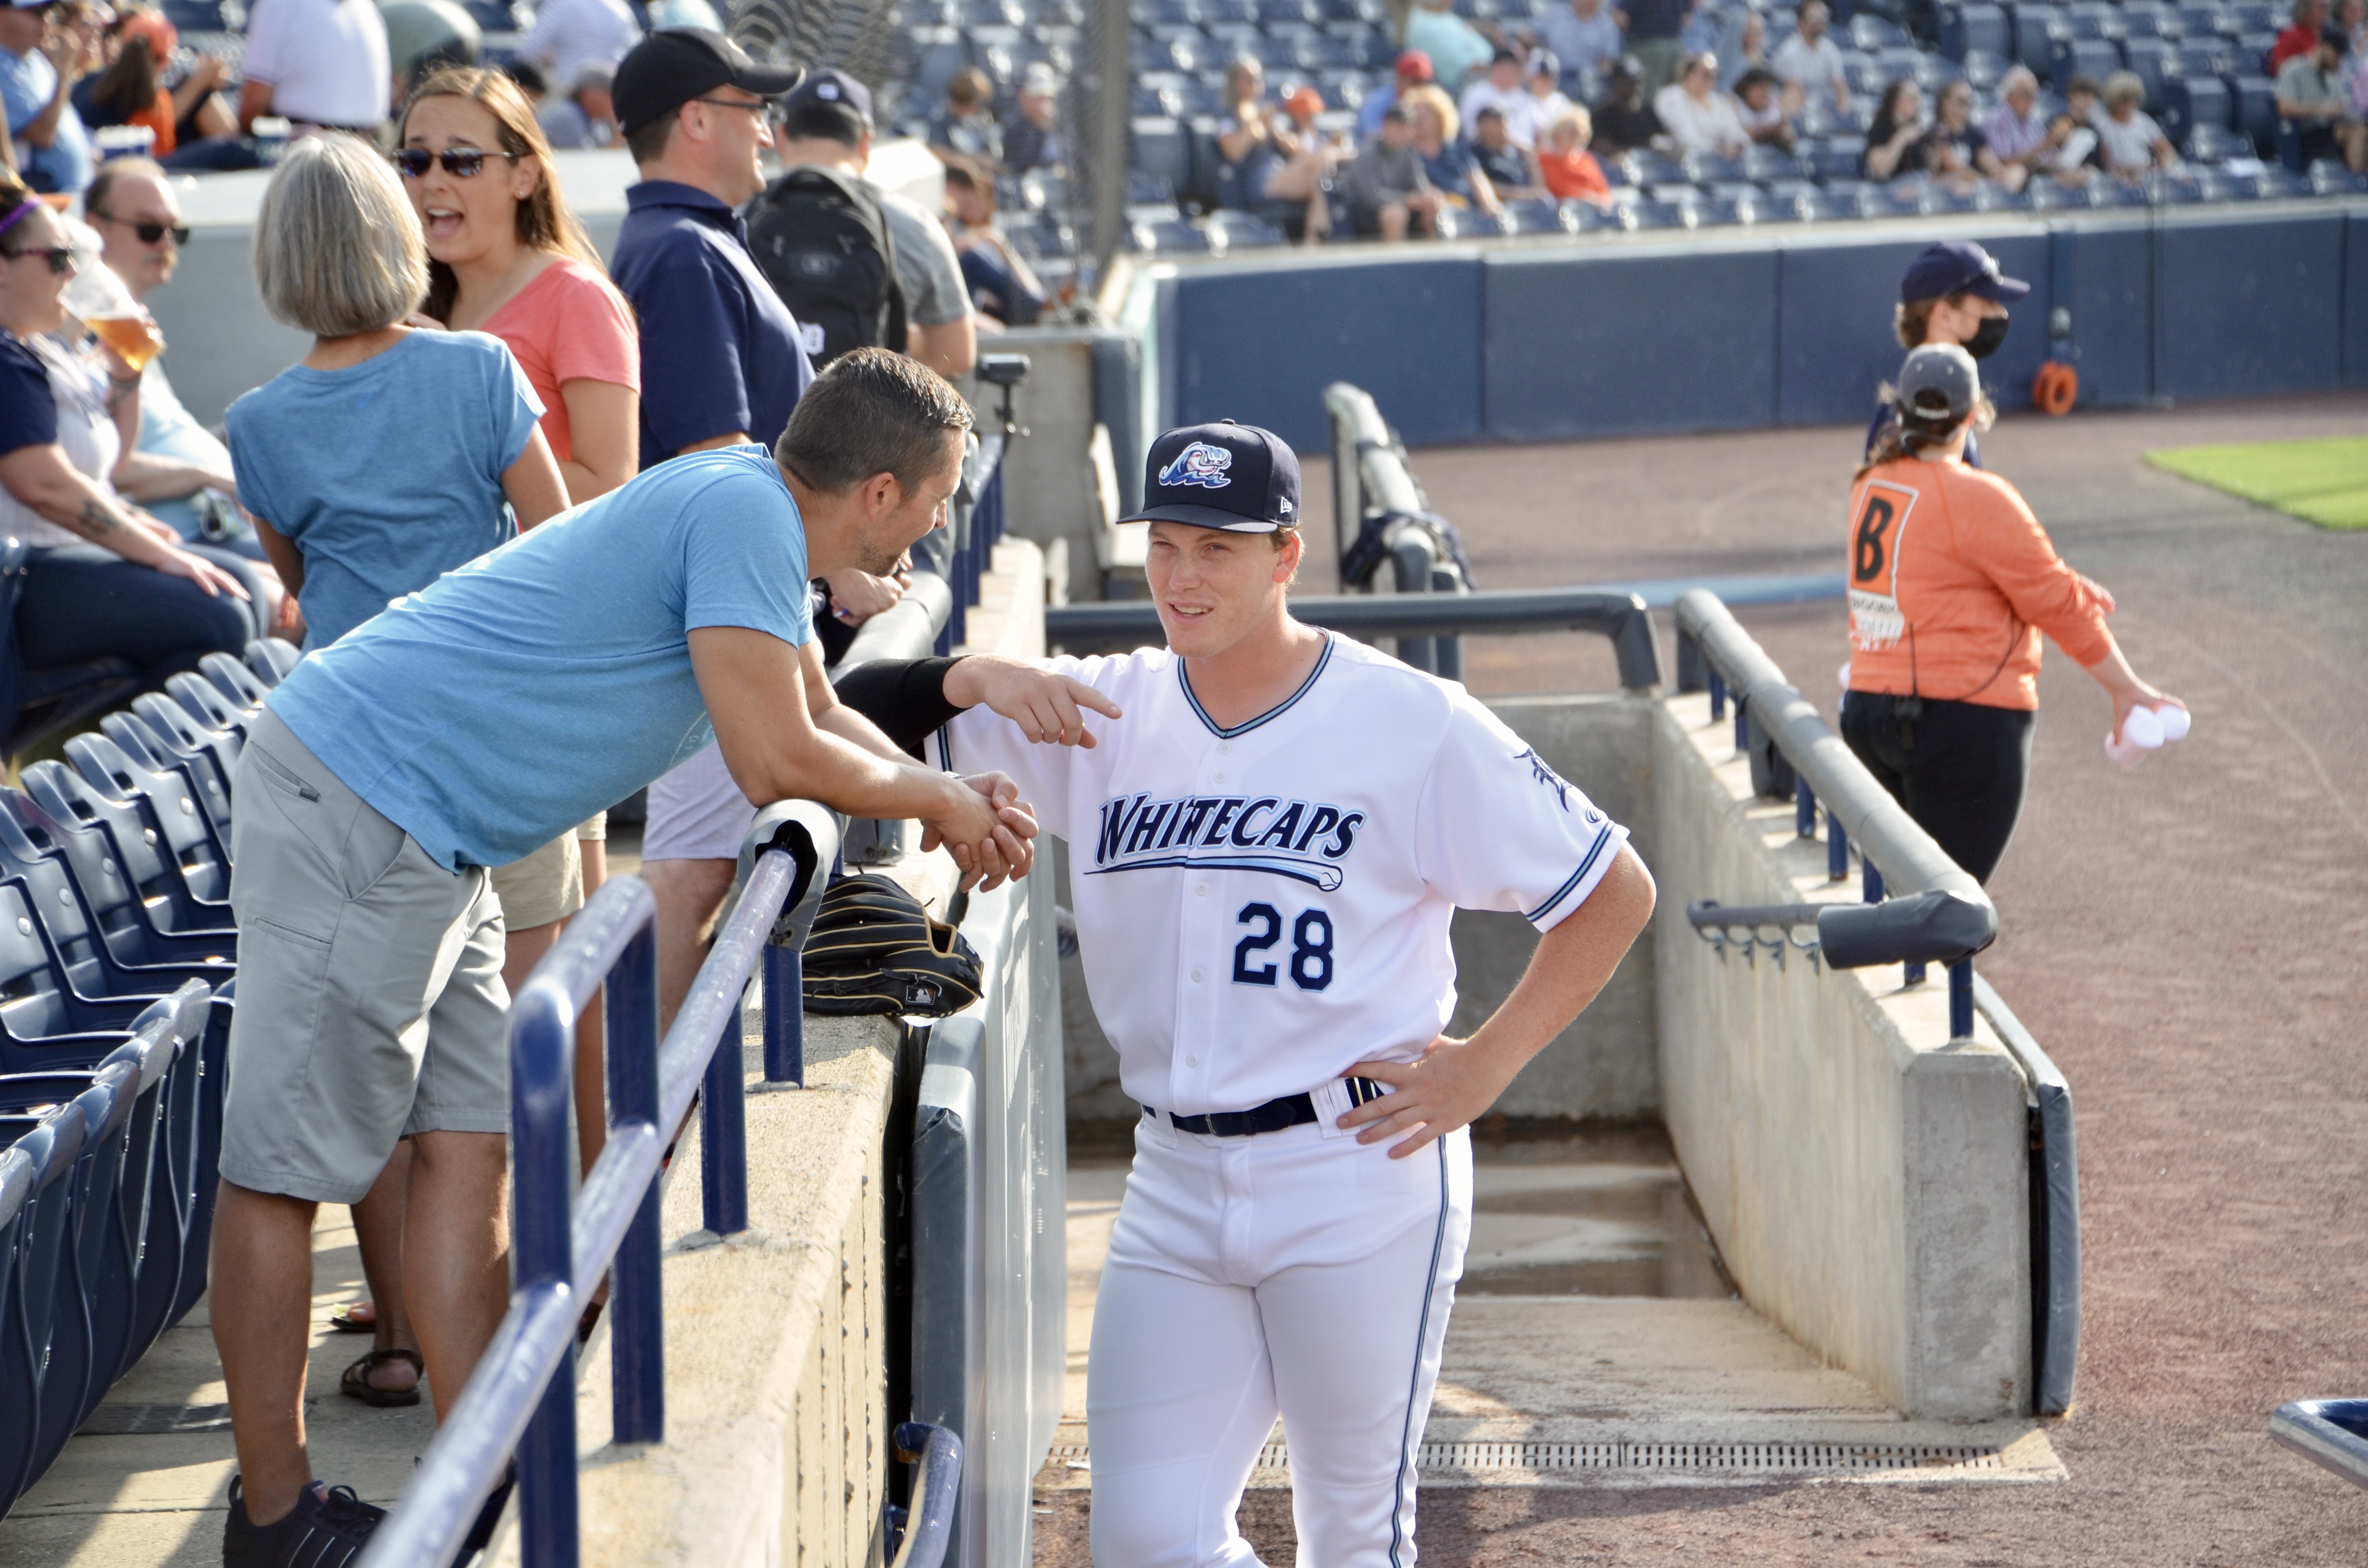 West Michigan Whitecaps Baseball 2022: 30 Games We're Excited For - Travel  the Mitten